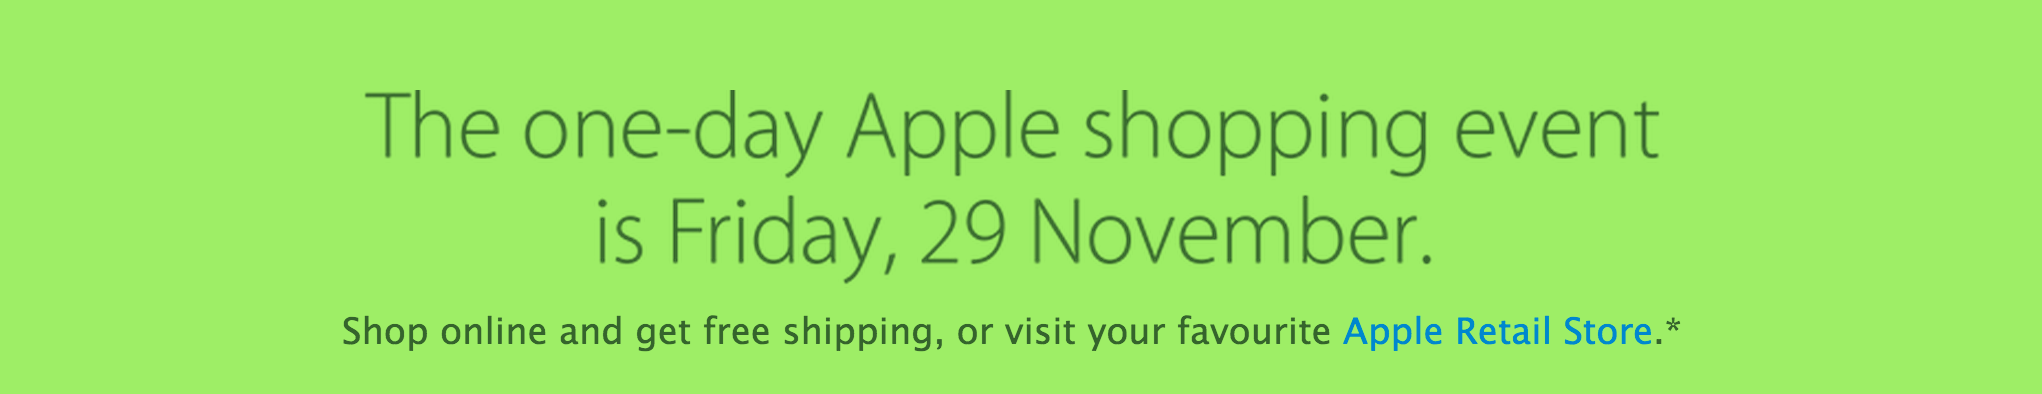 Apple Stores Canada Black Friday Deals 2013 Rumours | Canadian Freebies